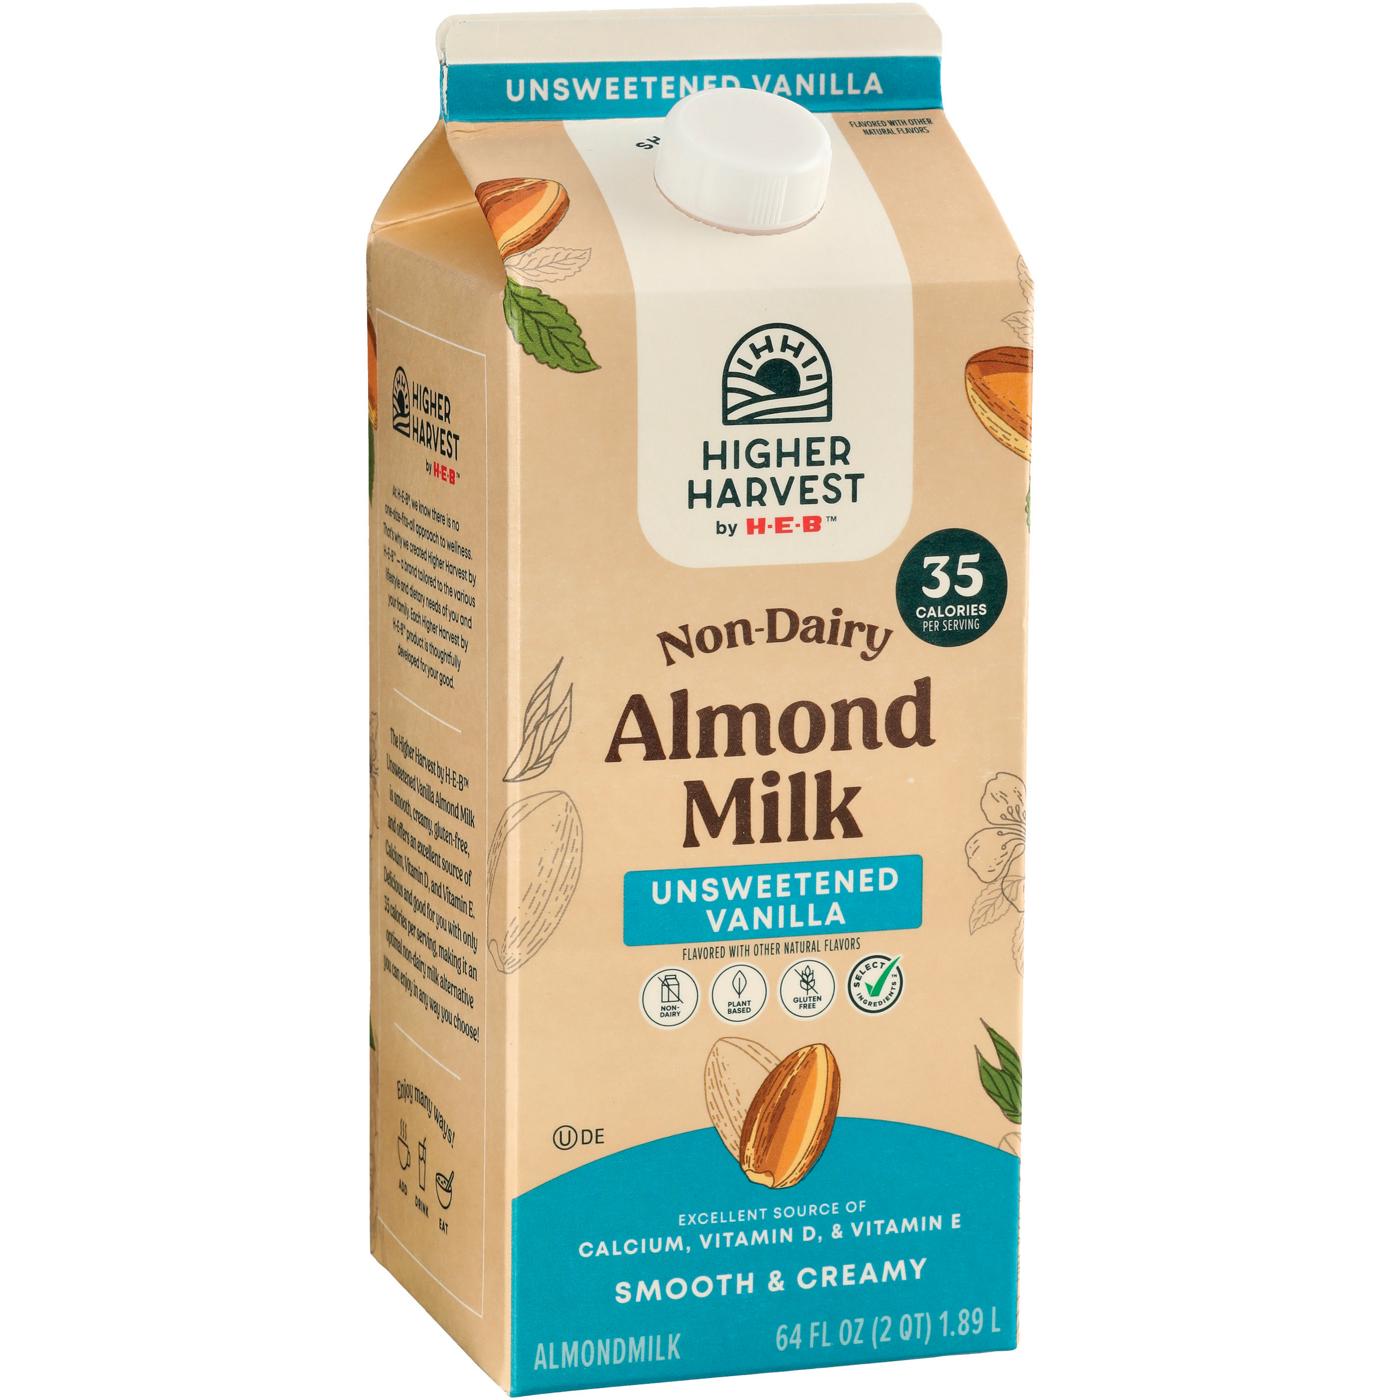 Higher Harvest by H-E-B Non-Dairy Almond Milk – Unsweetened Vanilla; image 2 of 2